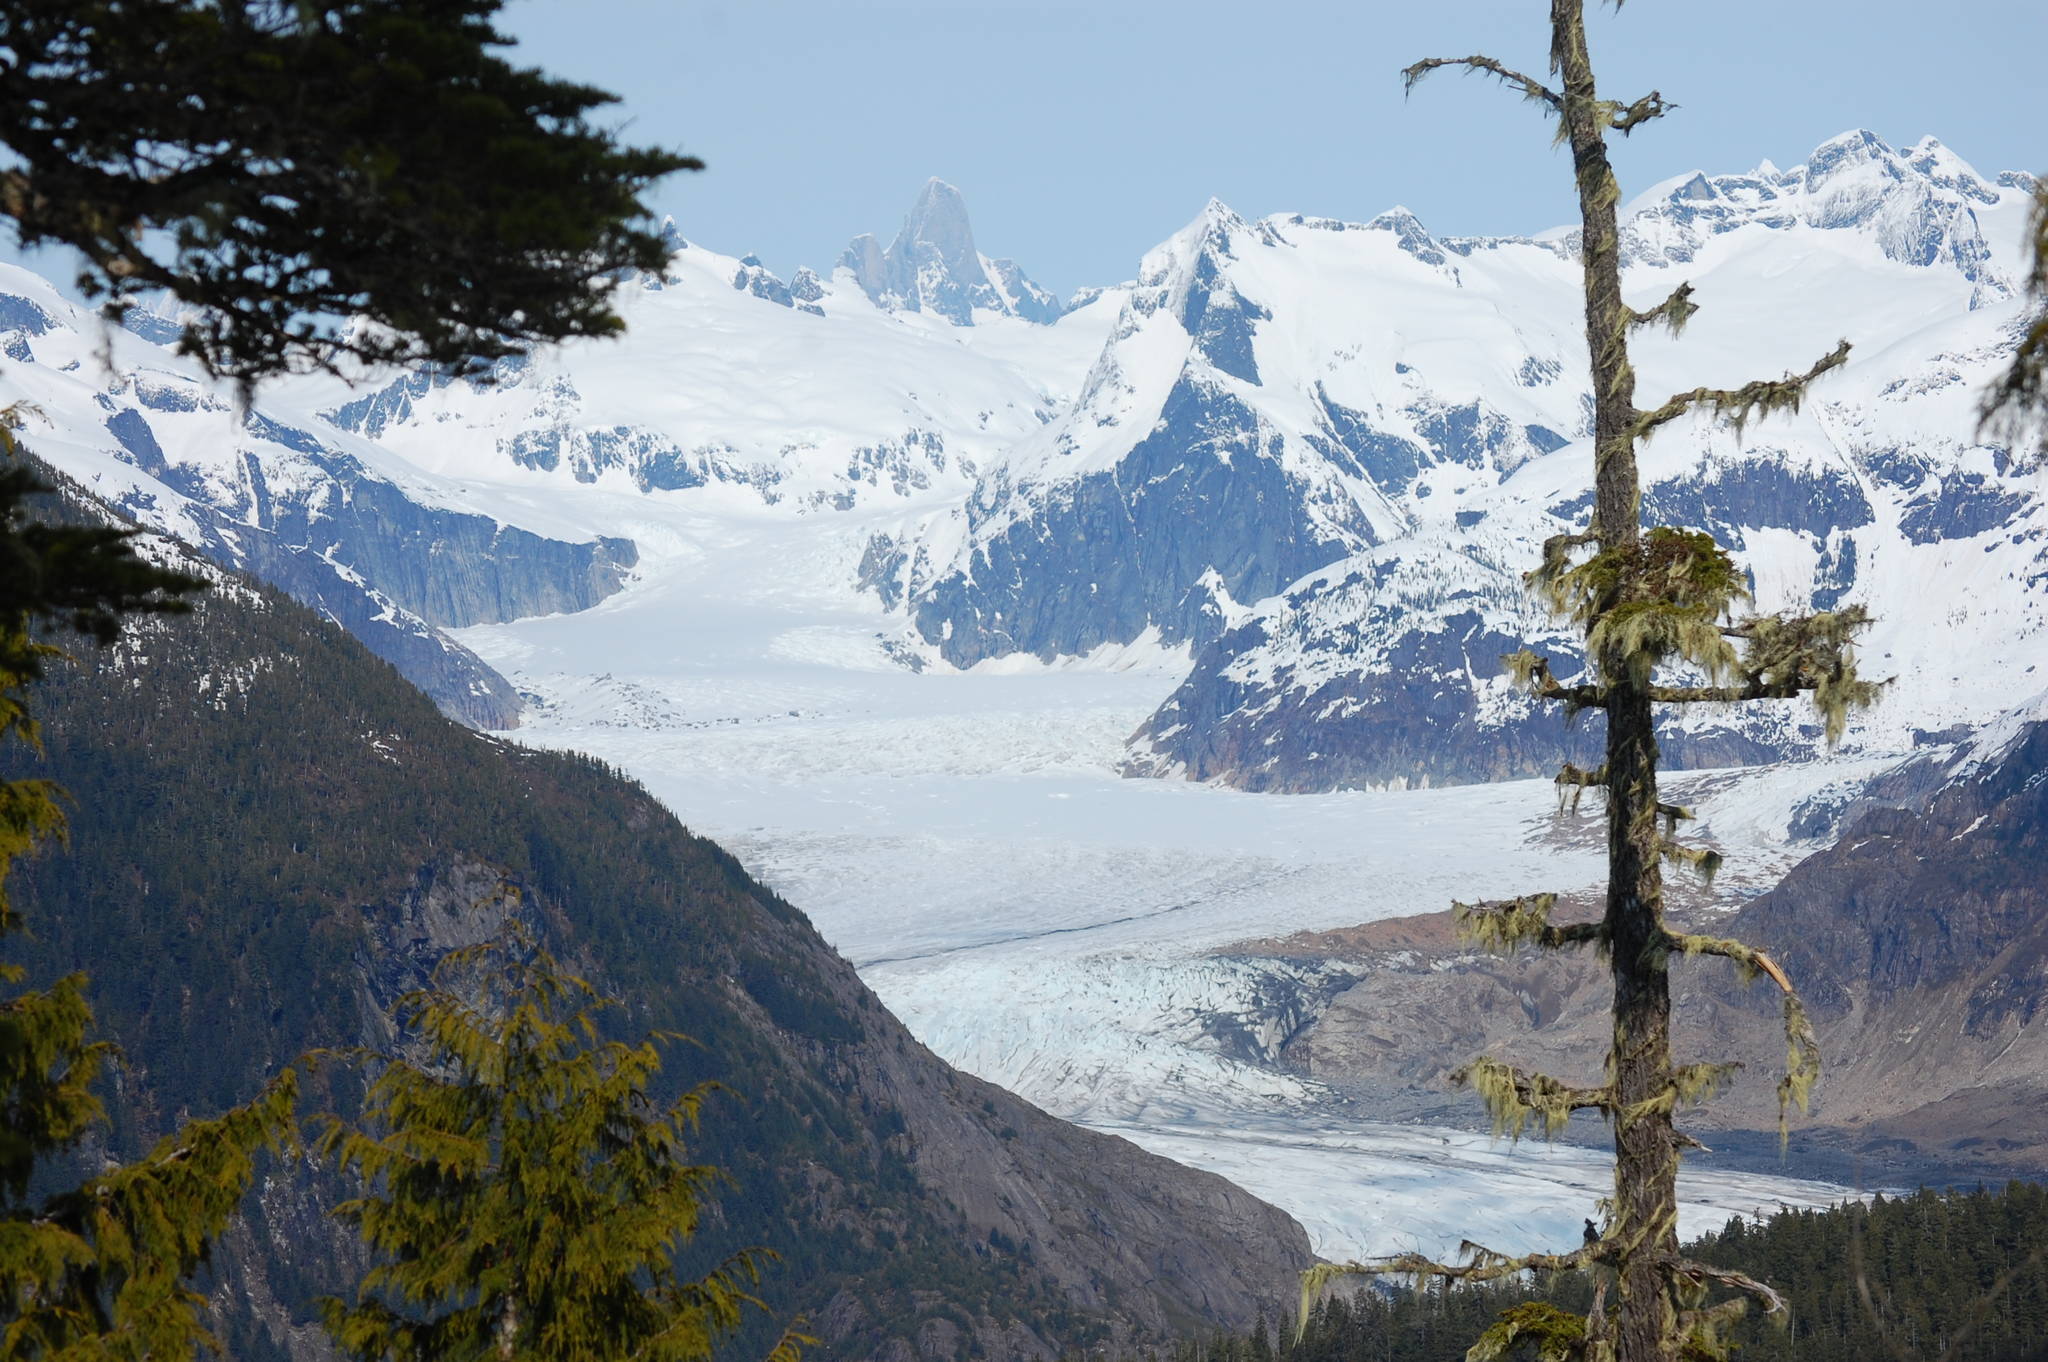 The Devils Thumb and the Patterson Glacier from the mountain where the alleged “devil creatures” chased Charlie in “A Testament to Ice” from “Haunted Inside Passage.” Photo by Bjorn Dihle.